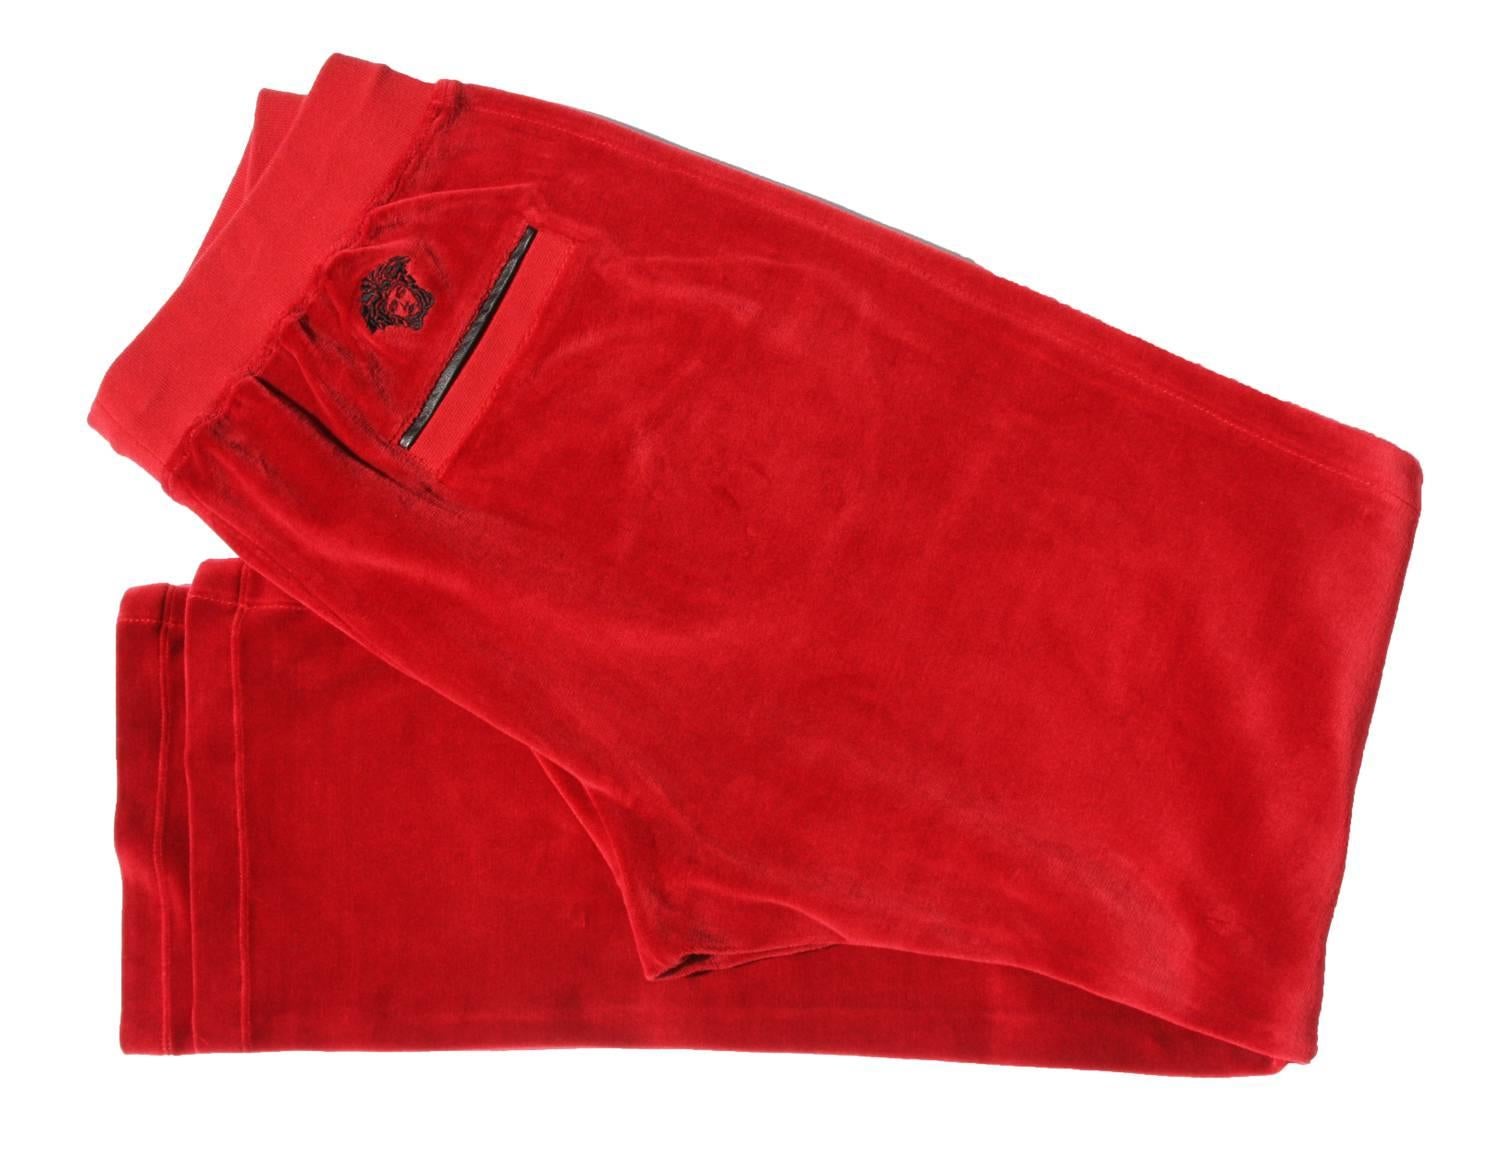 New Versace Medusa Men's Sweatpants
Designer sizes Available - M, L
Red Velvet Sweatpants with Black Leather Trim
Elasticated Waistband with drawstring fastening
Gold-tone hardware finished with Versace Logo
Side Slit Pockets and Rear Pocket with